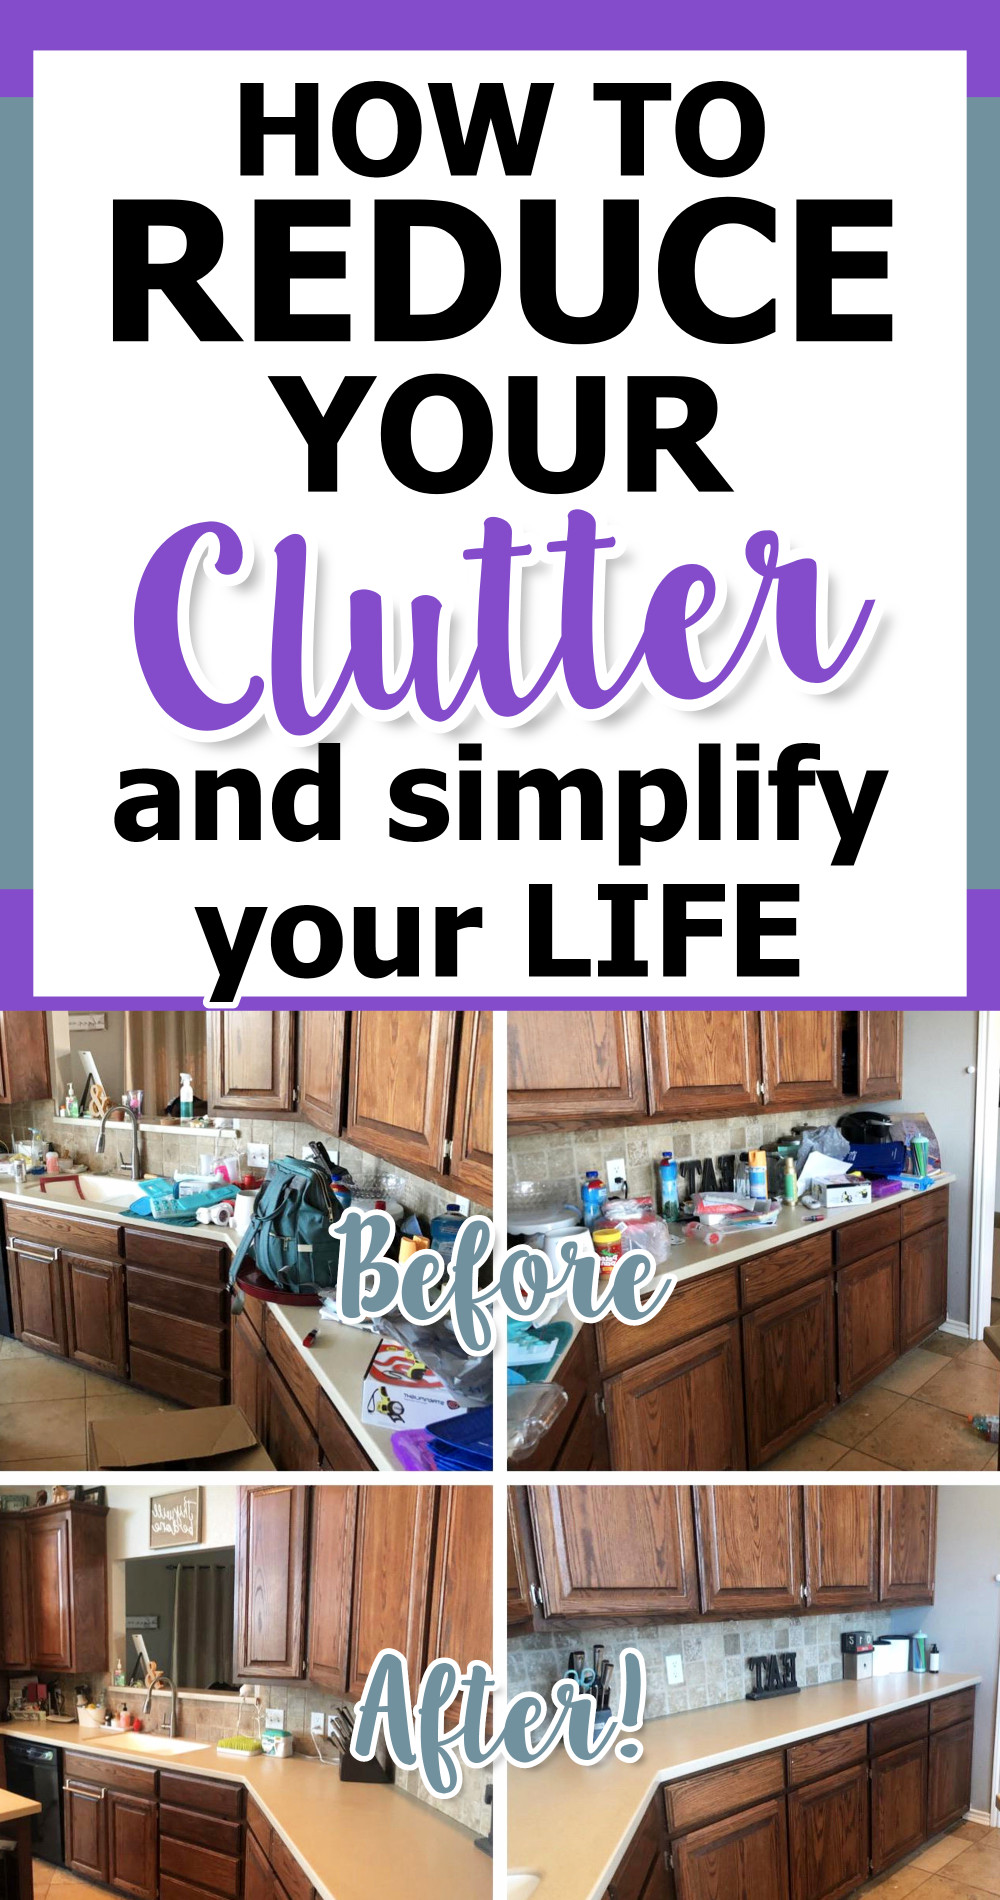 Kitchen Organization- How To Get Rid Of Clutter, Downsize and Get Seriously Organized